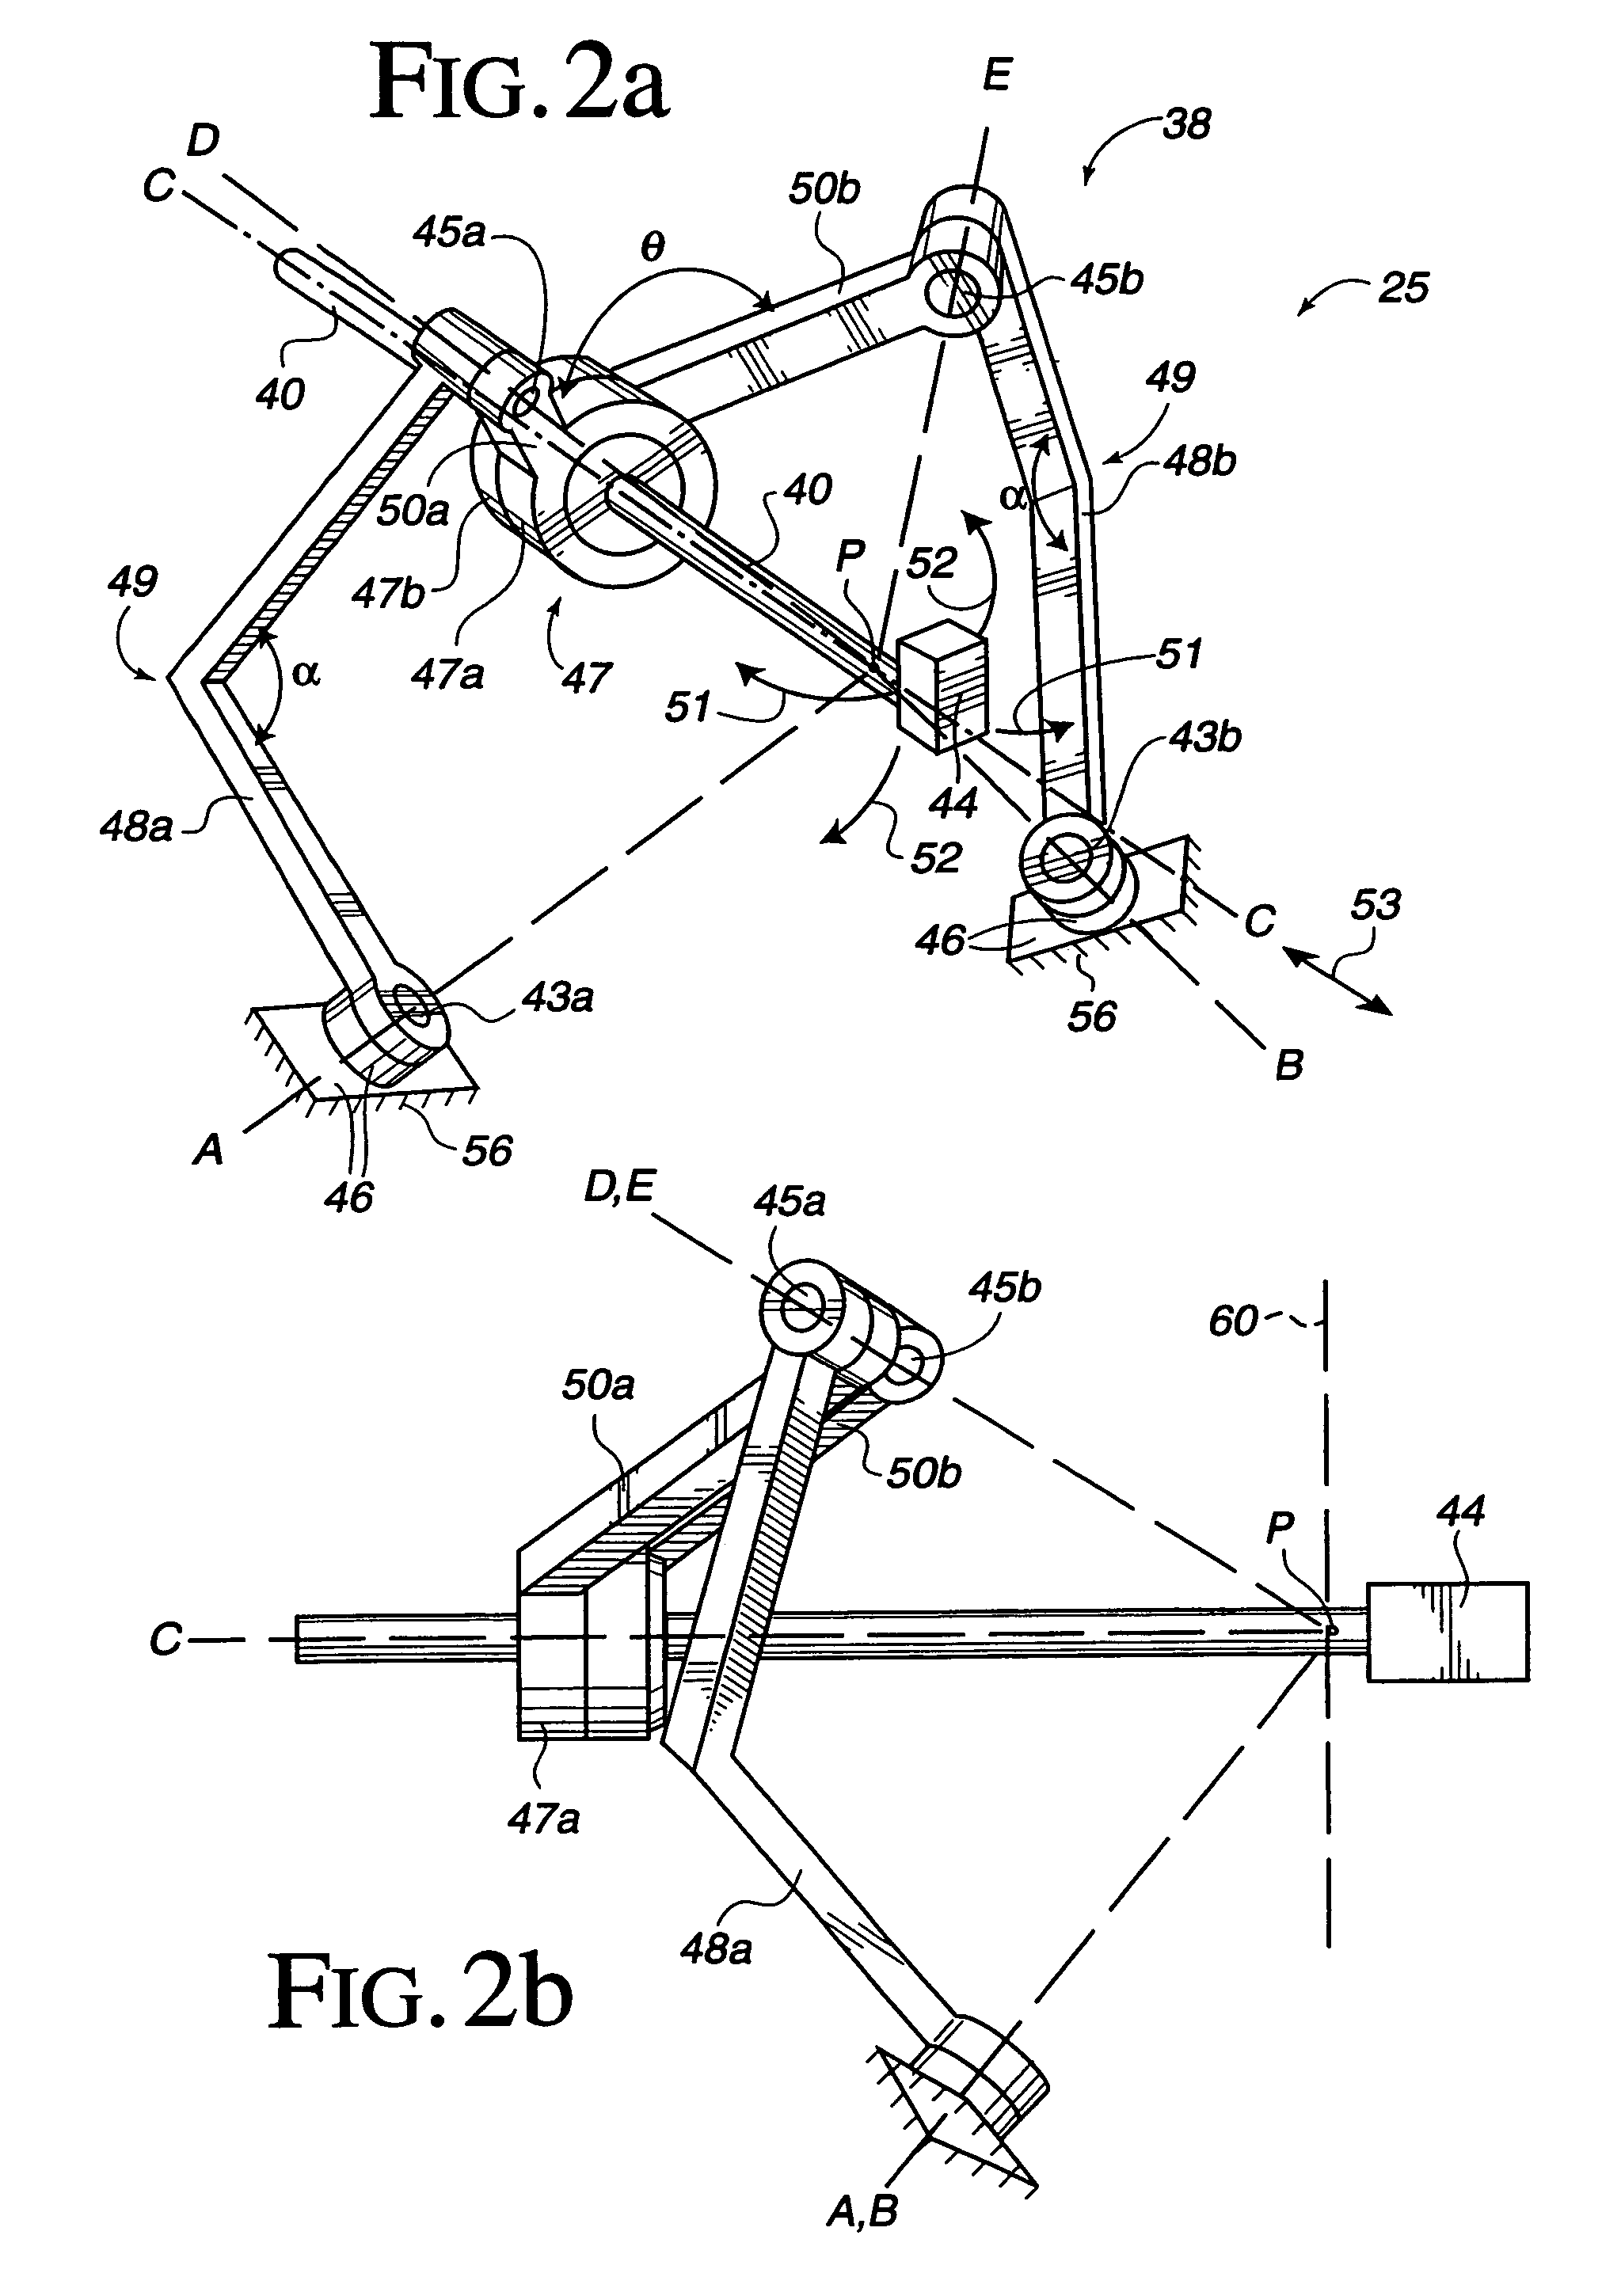 Mechanical interface for a computer system